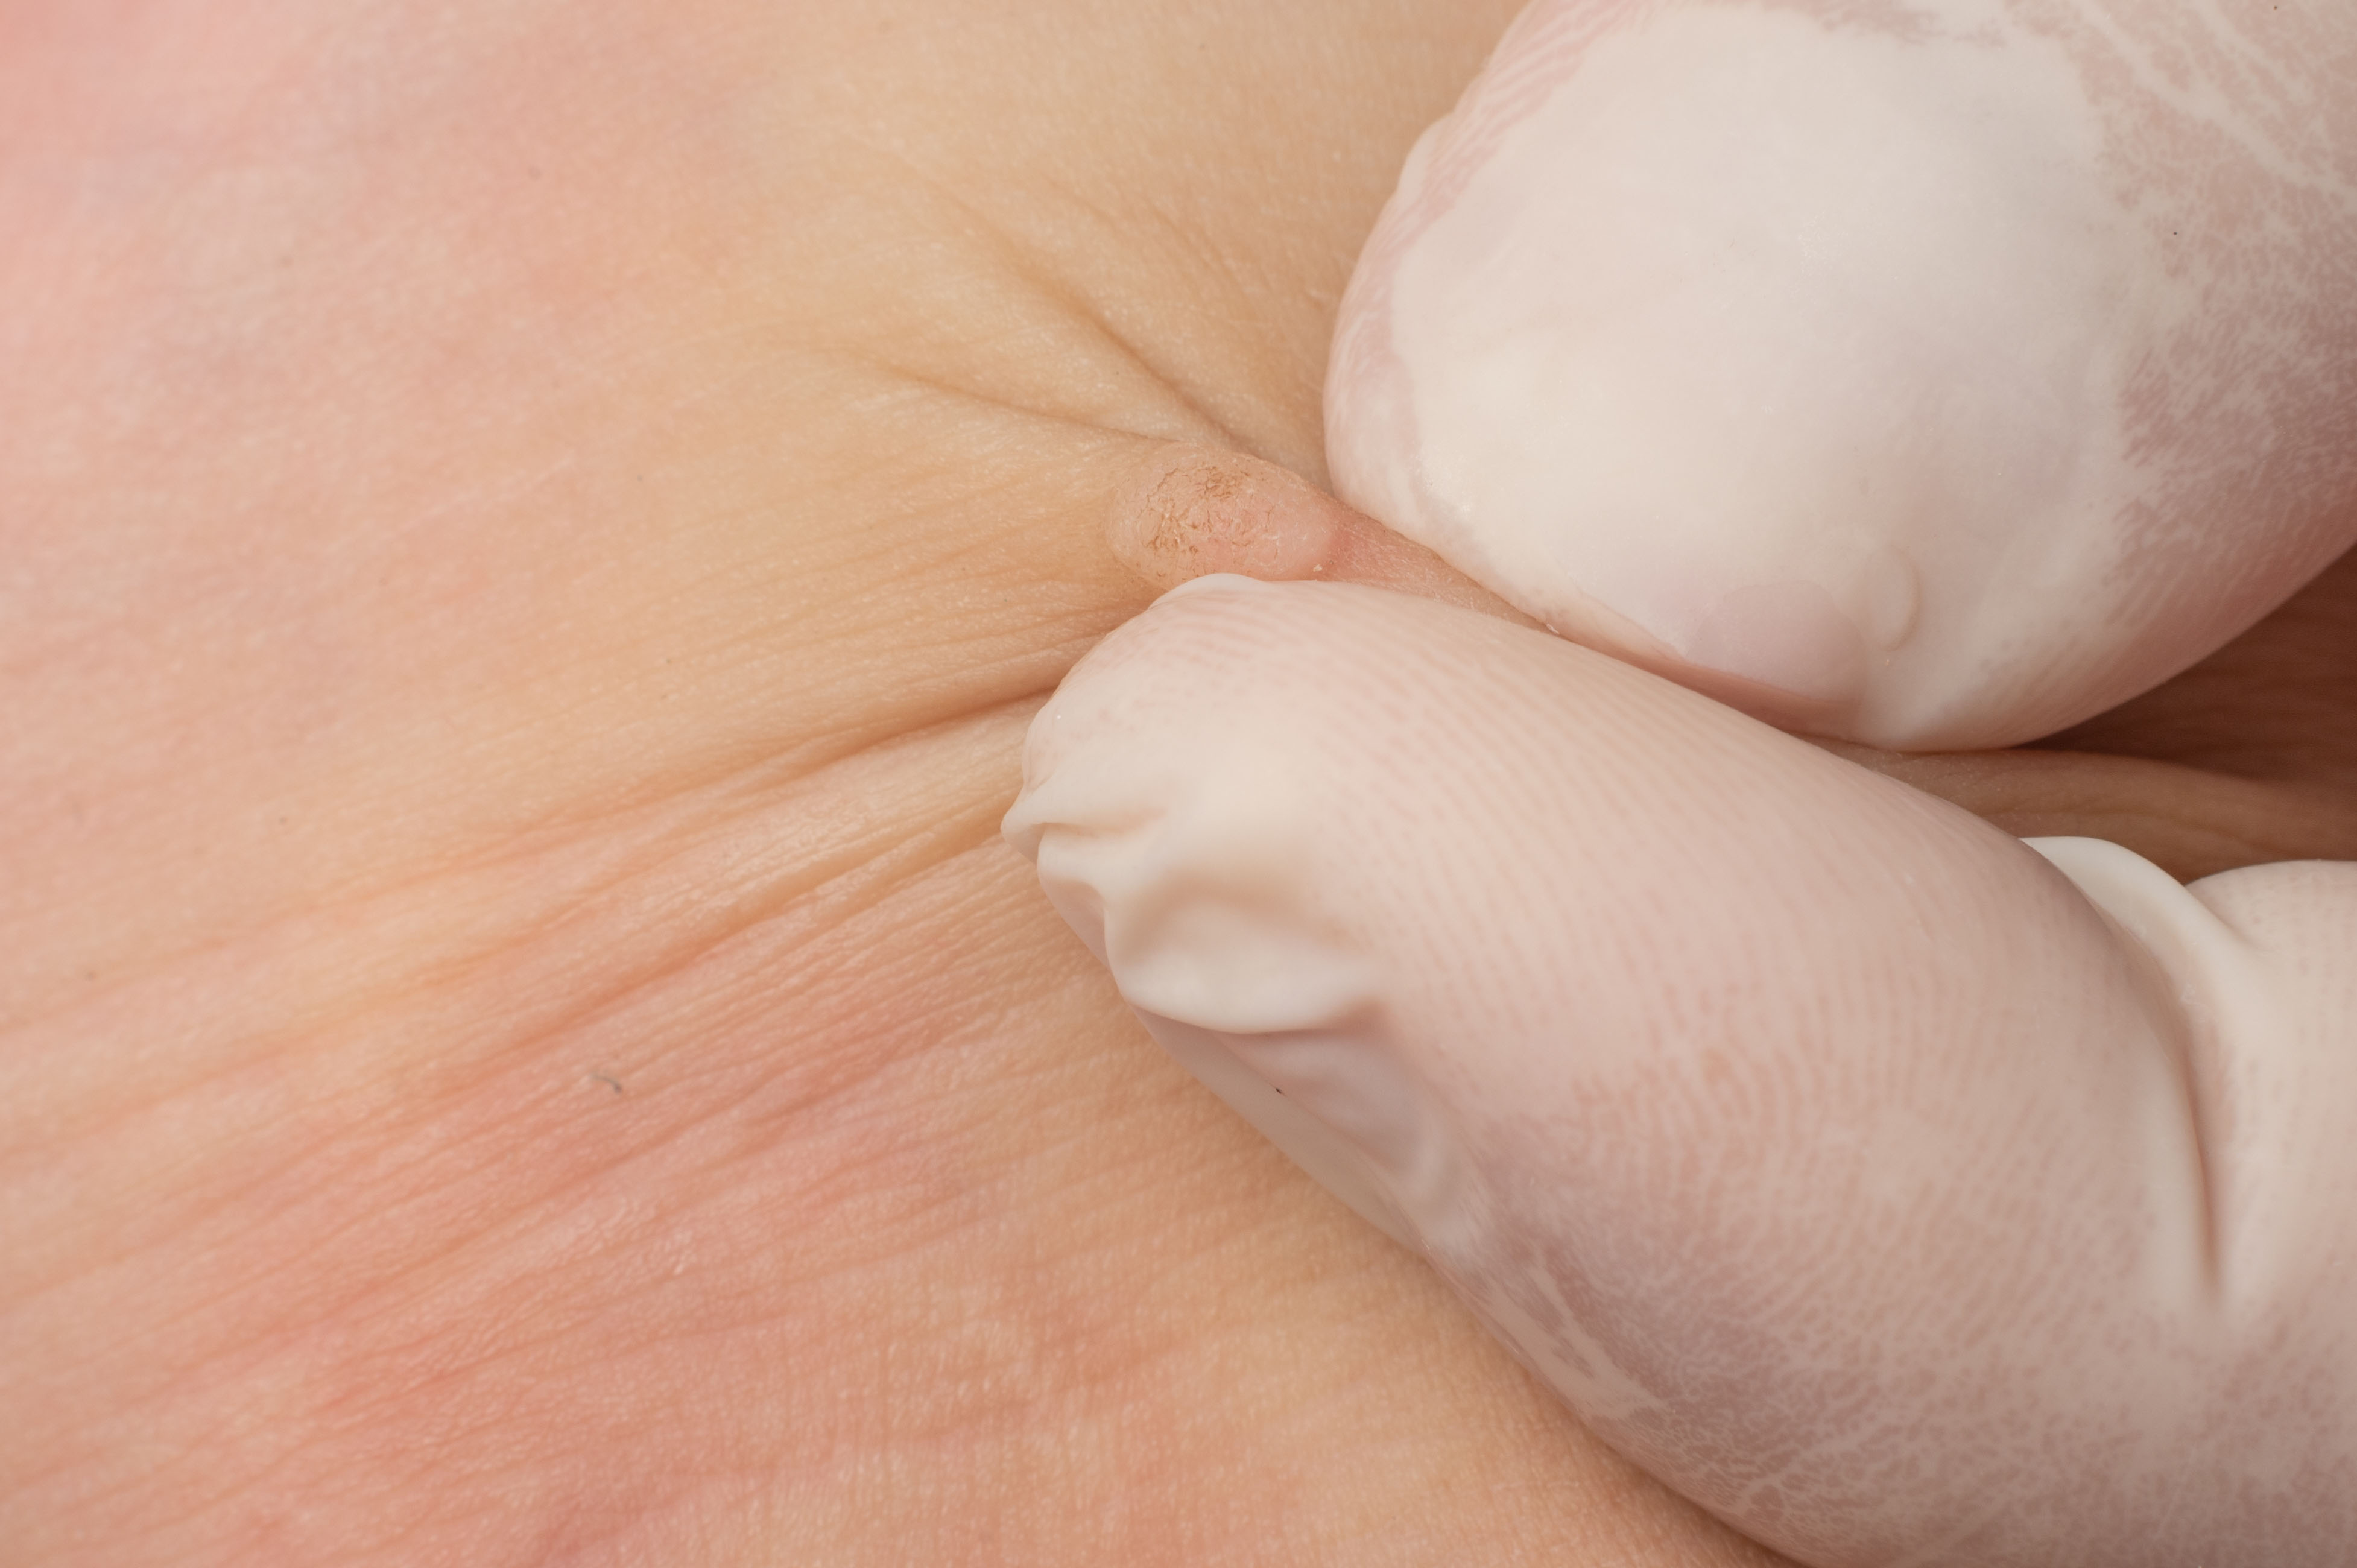 How to identify and treat common warts